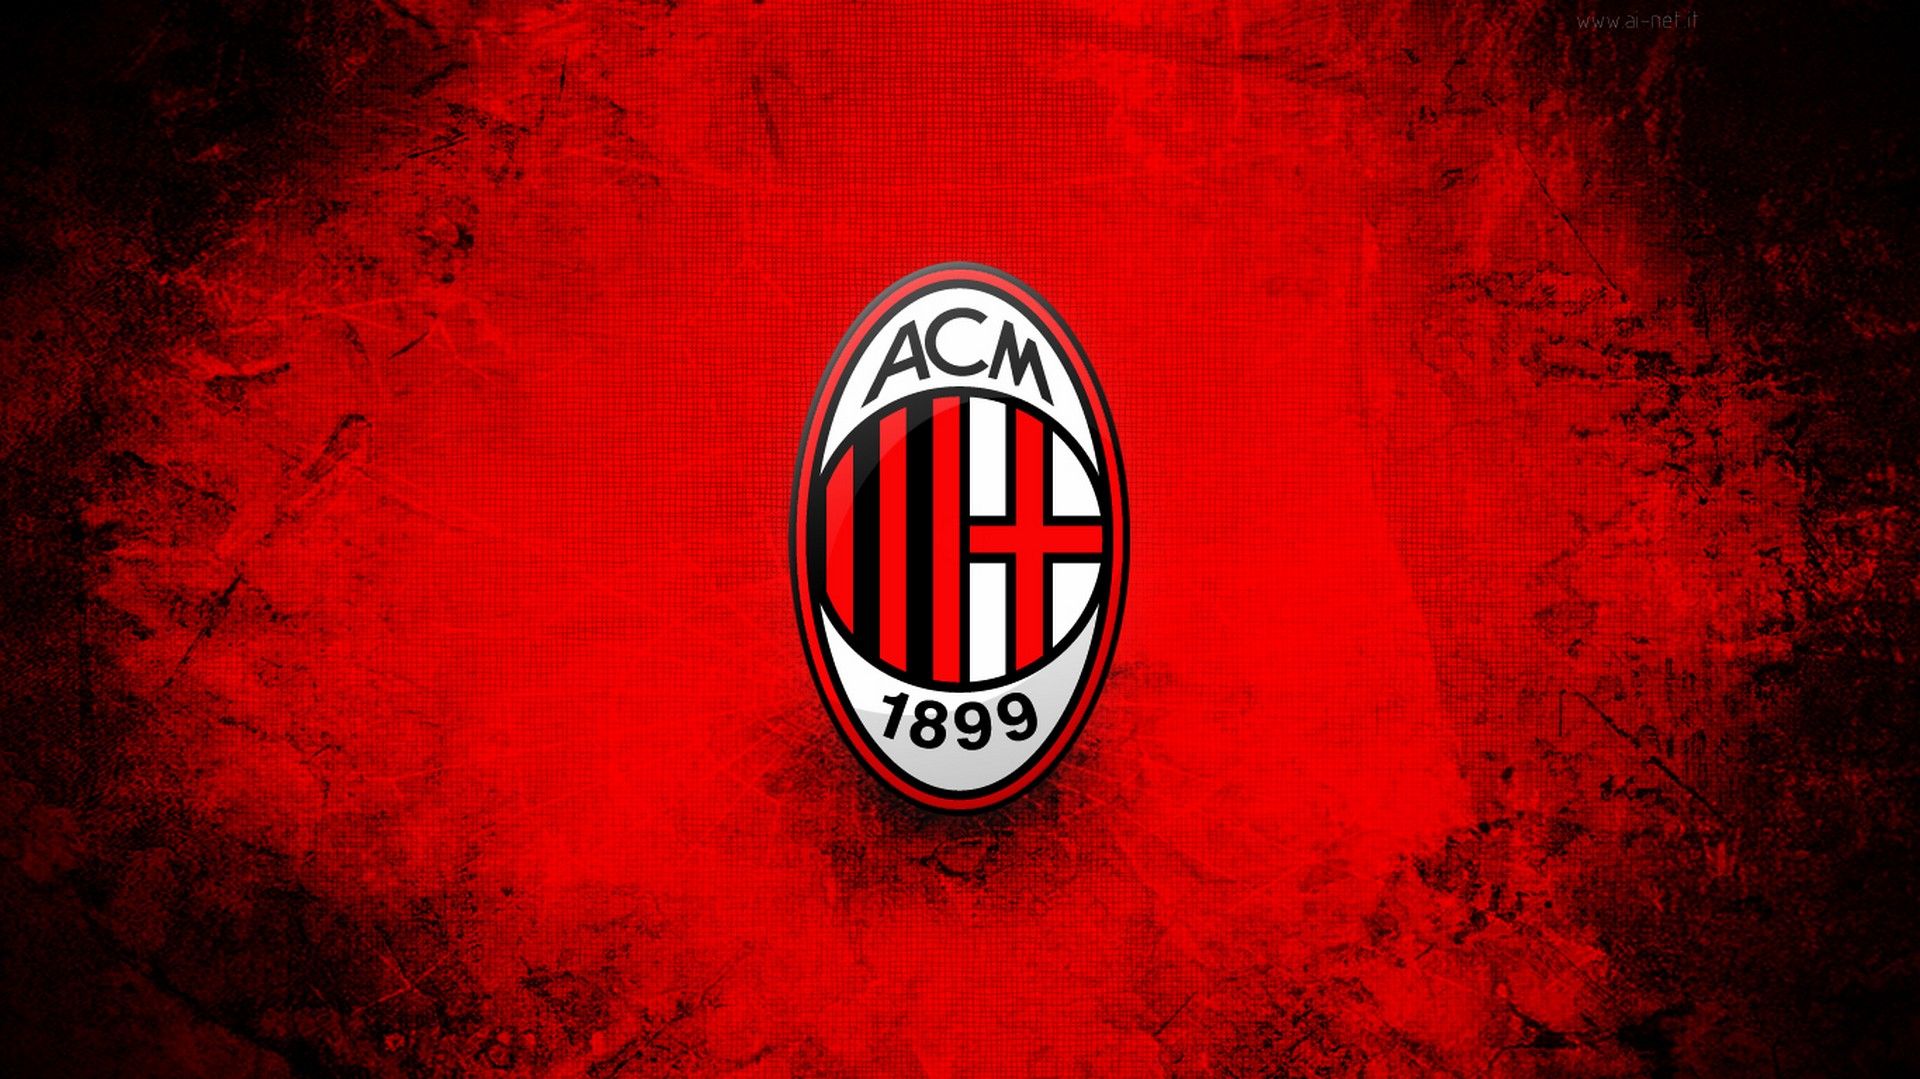 AC Milan as a brand is the most recognized Italian football club in America and China